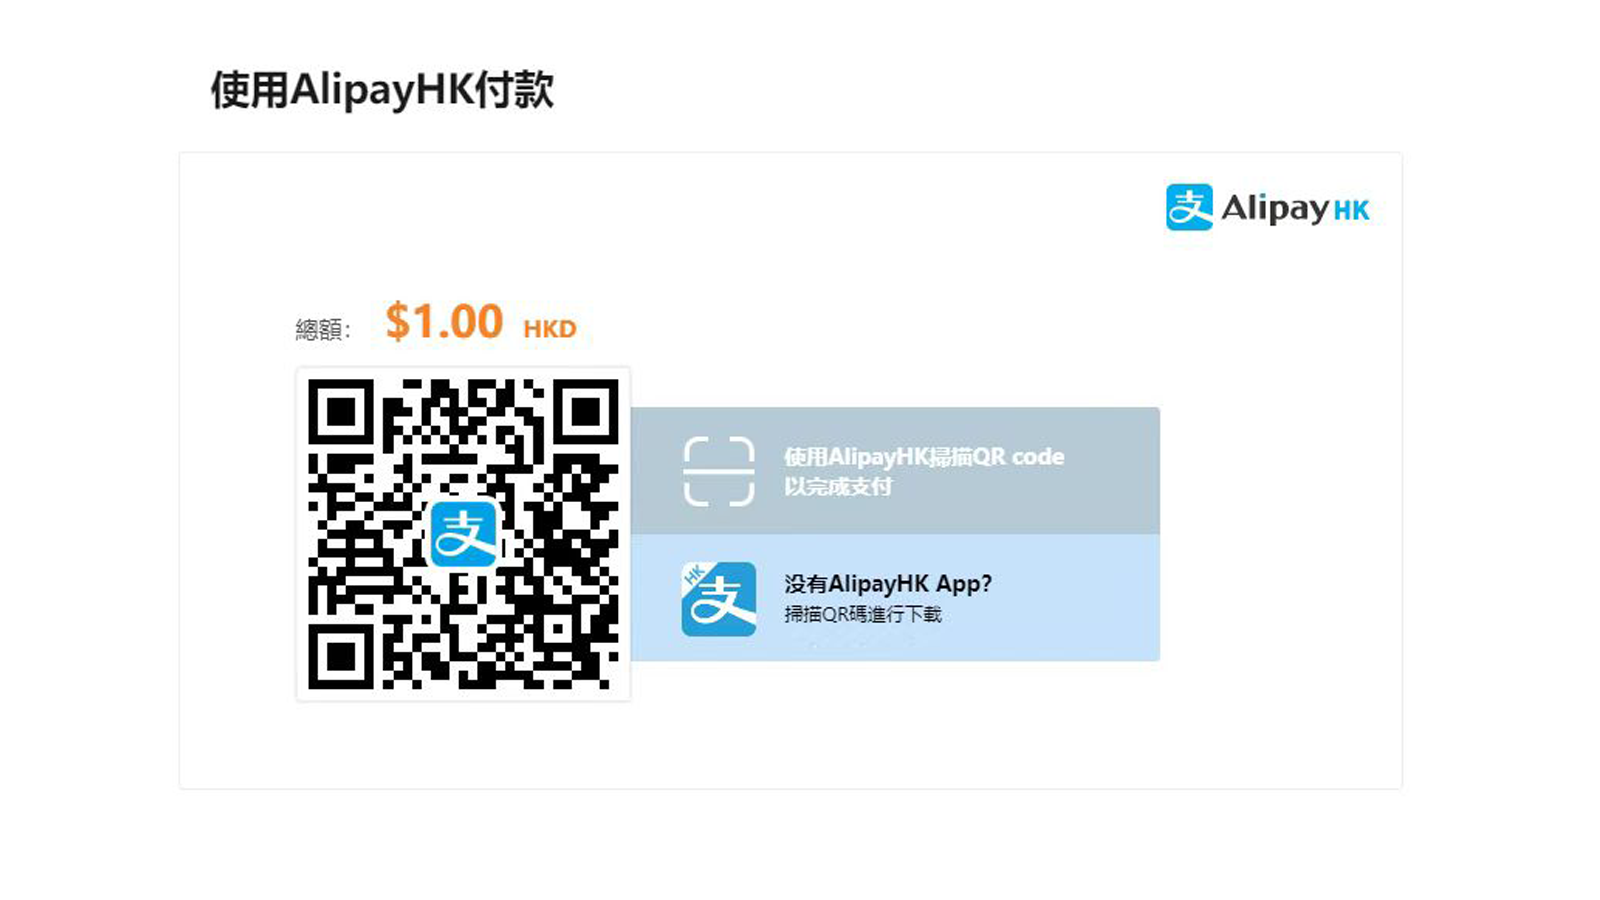 Alipay HK payment page.